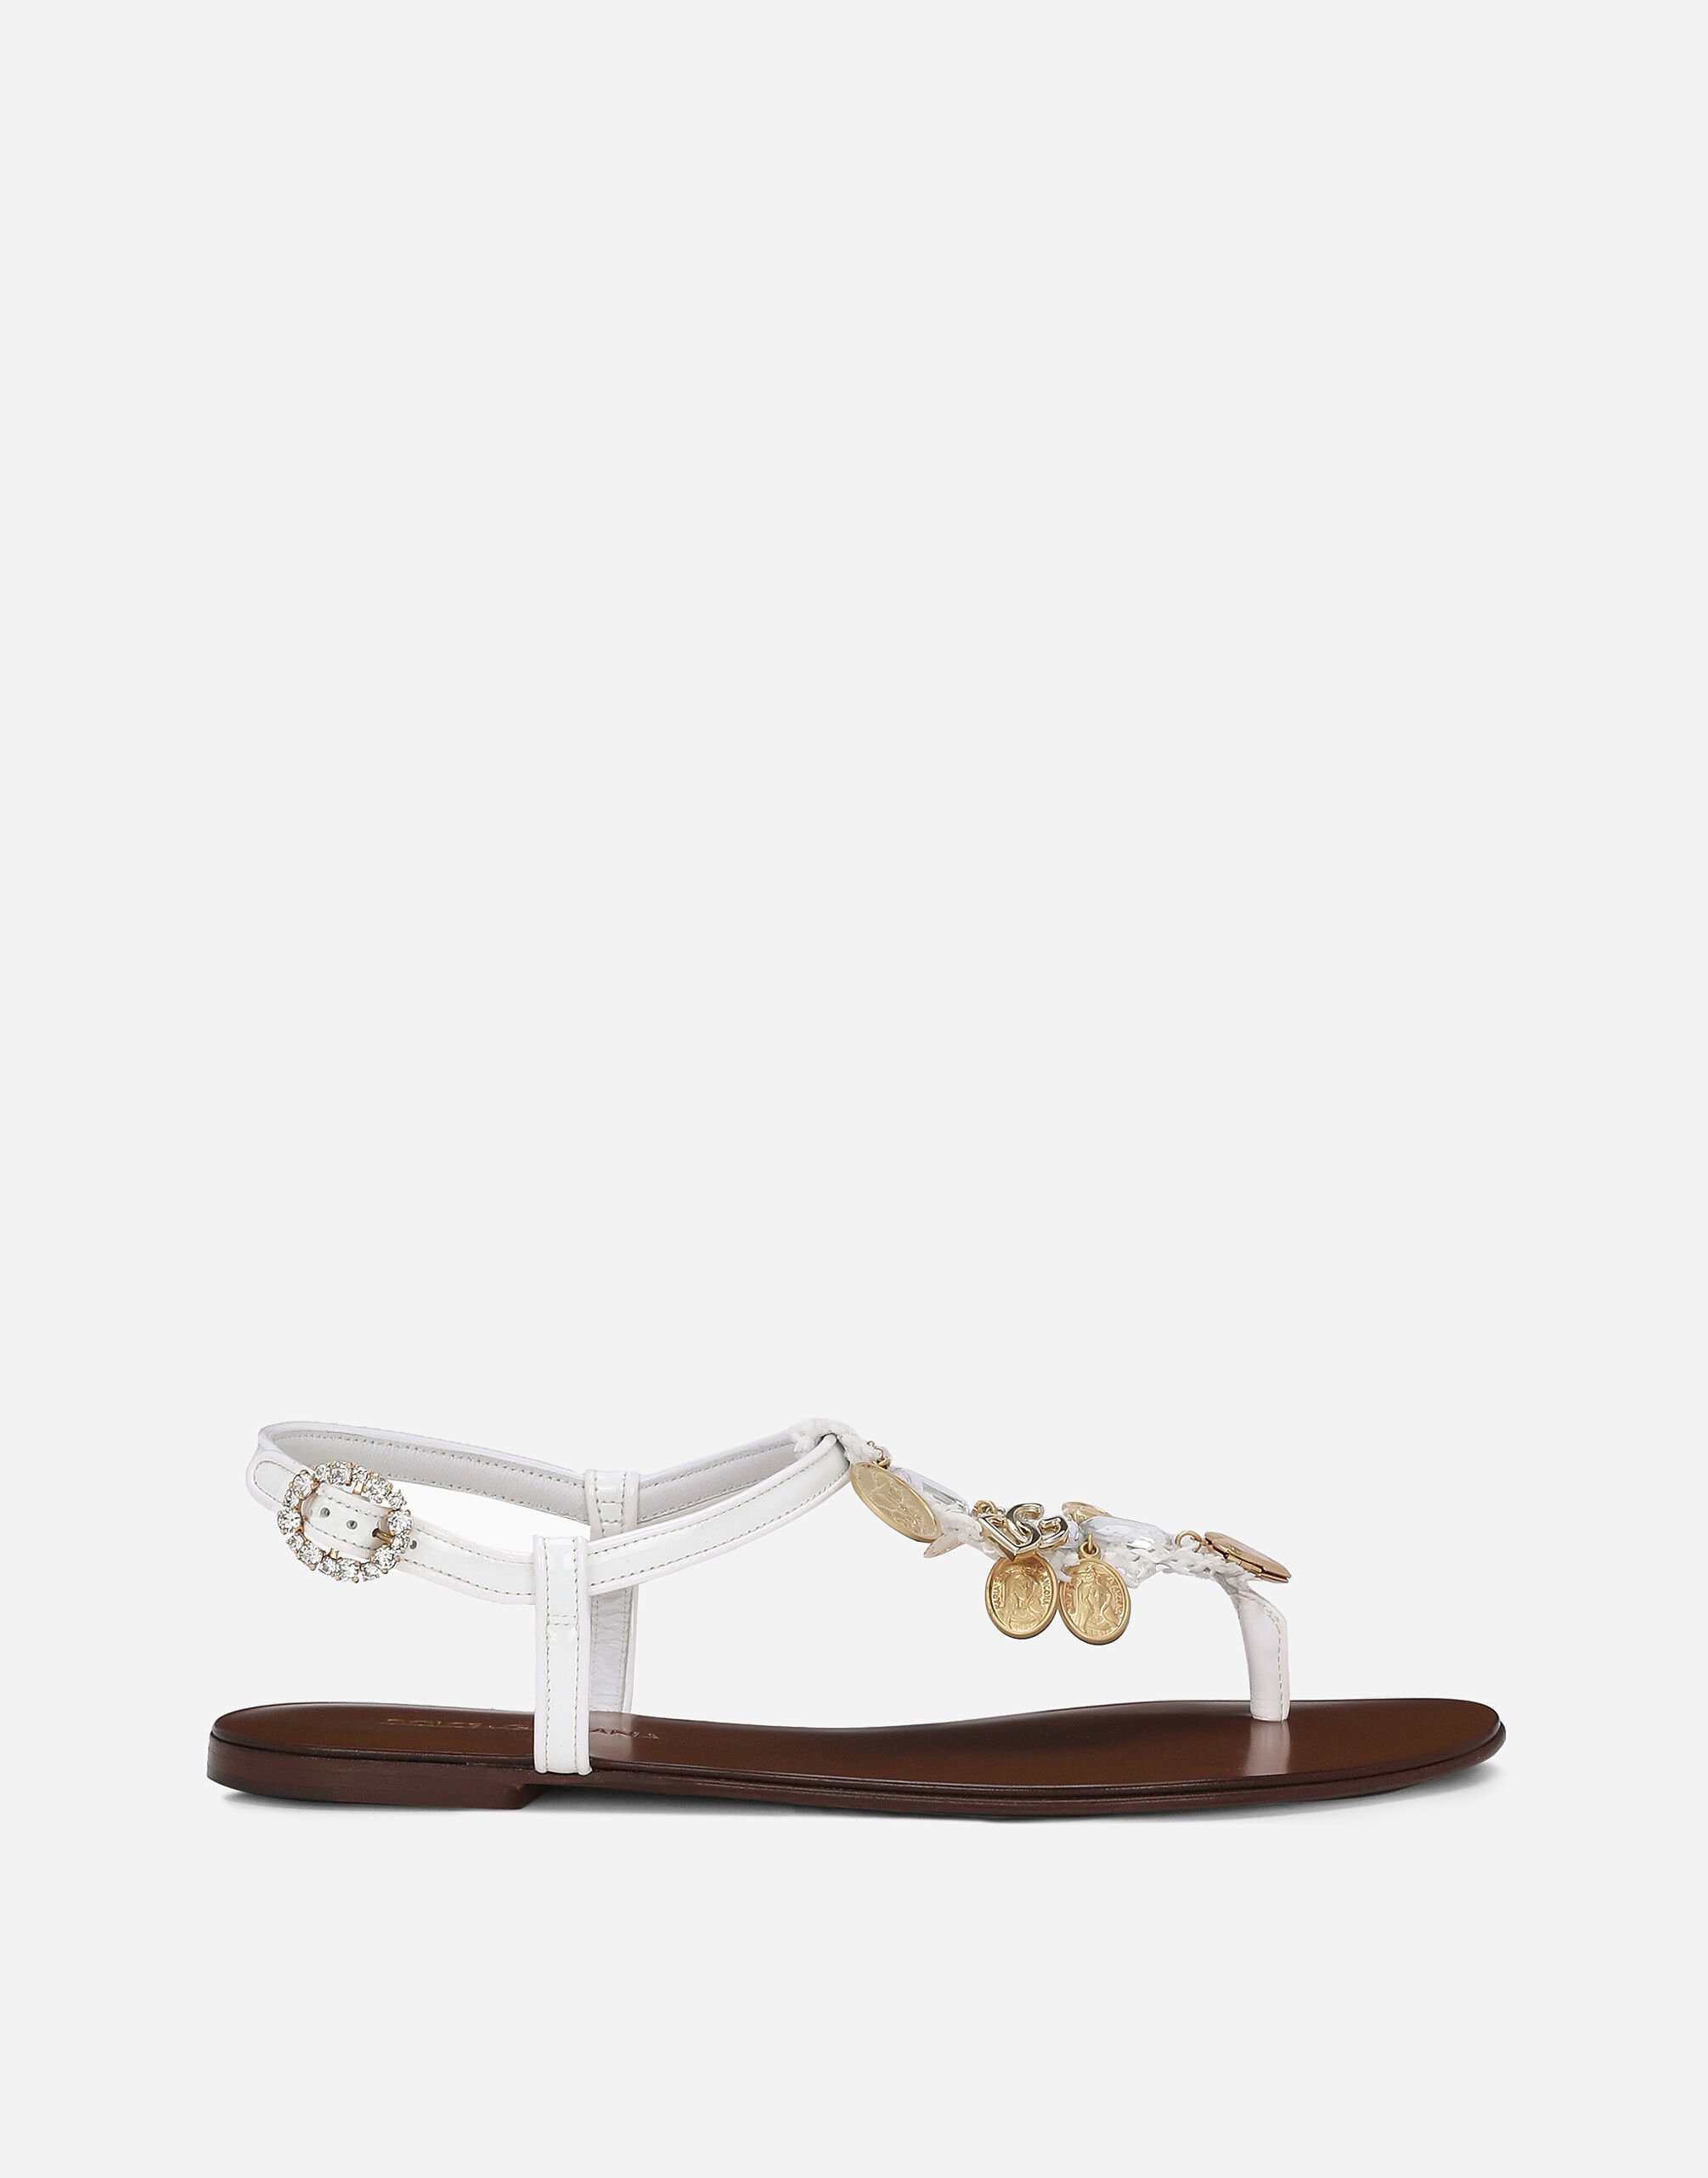 Dolce&Gabbana Raffia thong sandals with embroidered votive medallions Brown FS215AGDBY0